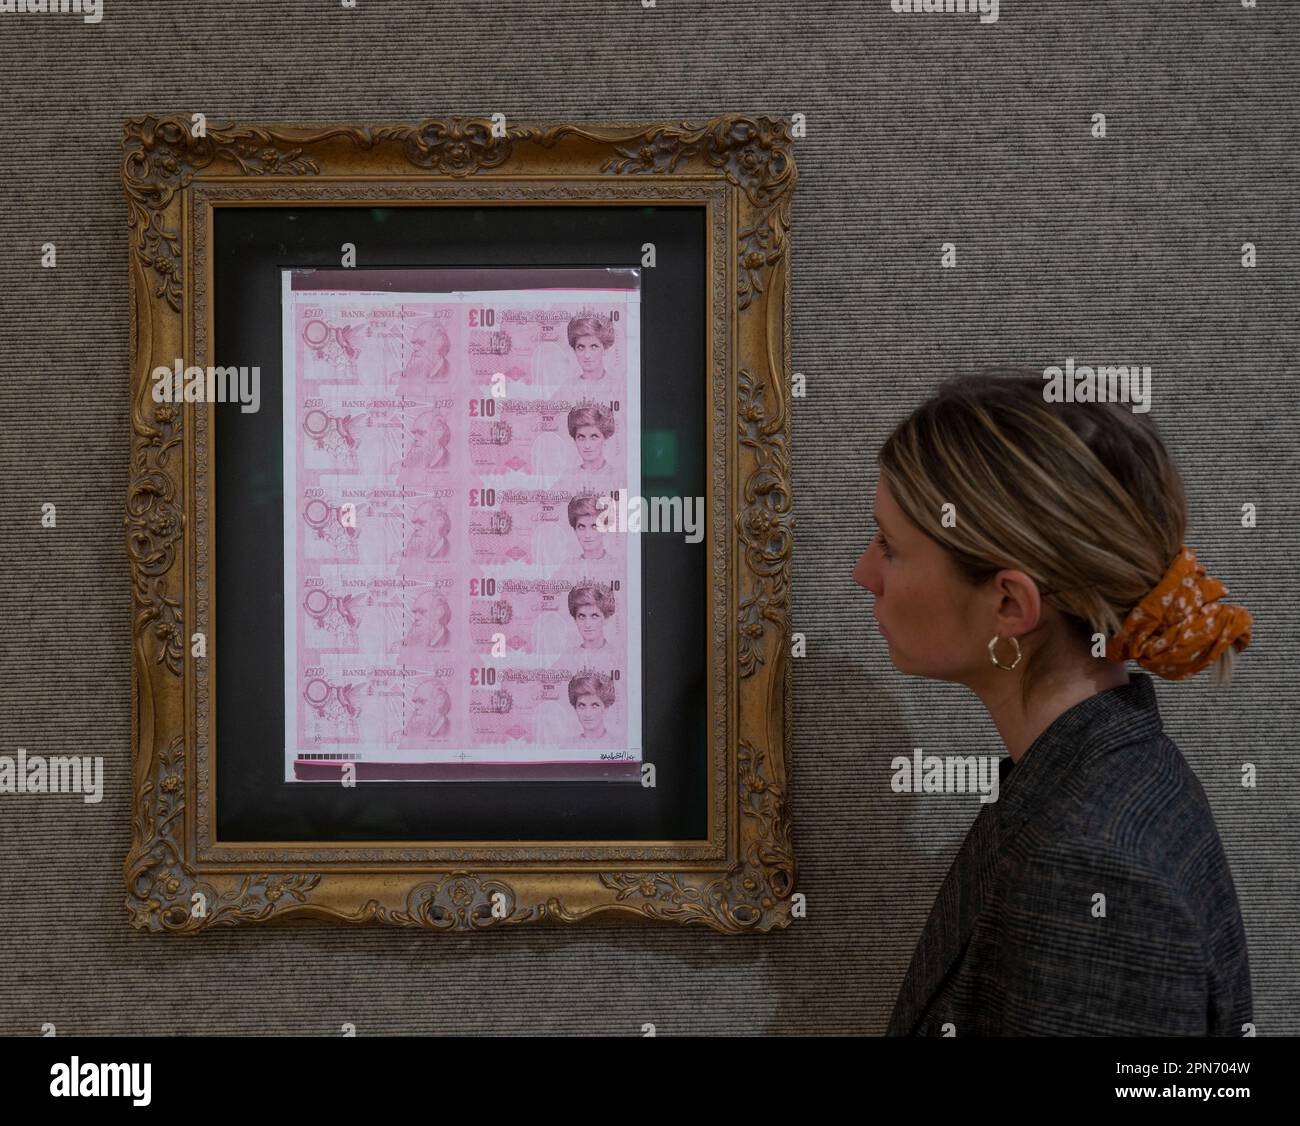 Bonhams, London, UK. 17th Apr, 2023. Hot Off the Press, new prints and multiples, is a tightly curated auction dedicated to celebrating some of the most exciting artists working today alongside well-established contemporary art market leaders and takes place on 19 April. Image: Banksy, Di Faced Tenner, £45,000-60,000. Credit: Malcolm Park/Alamy Live News Stock Photo